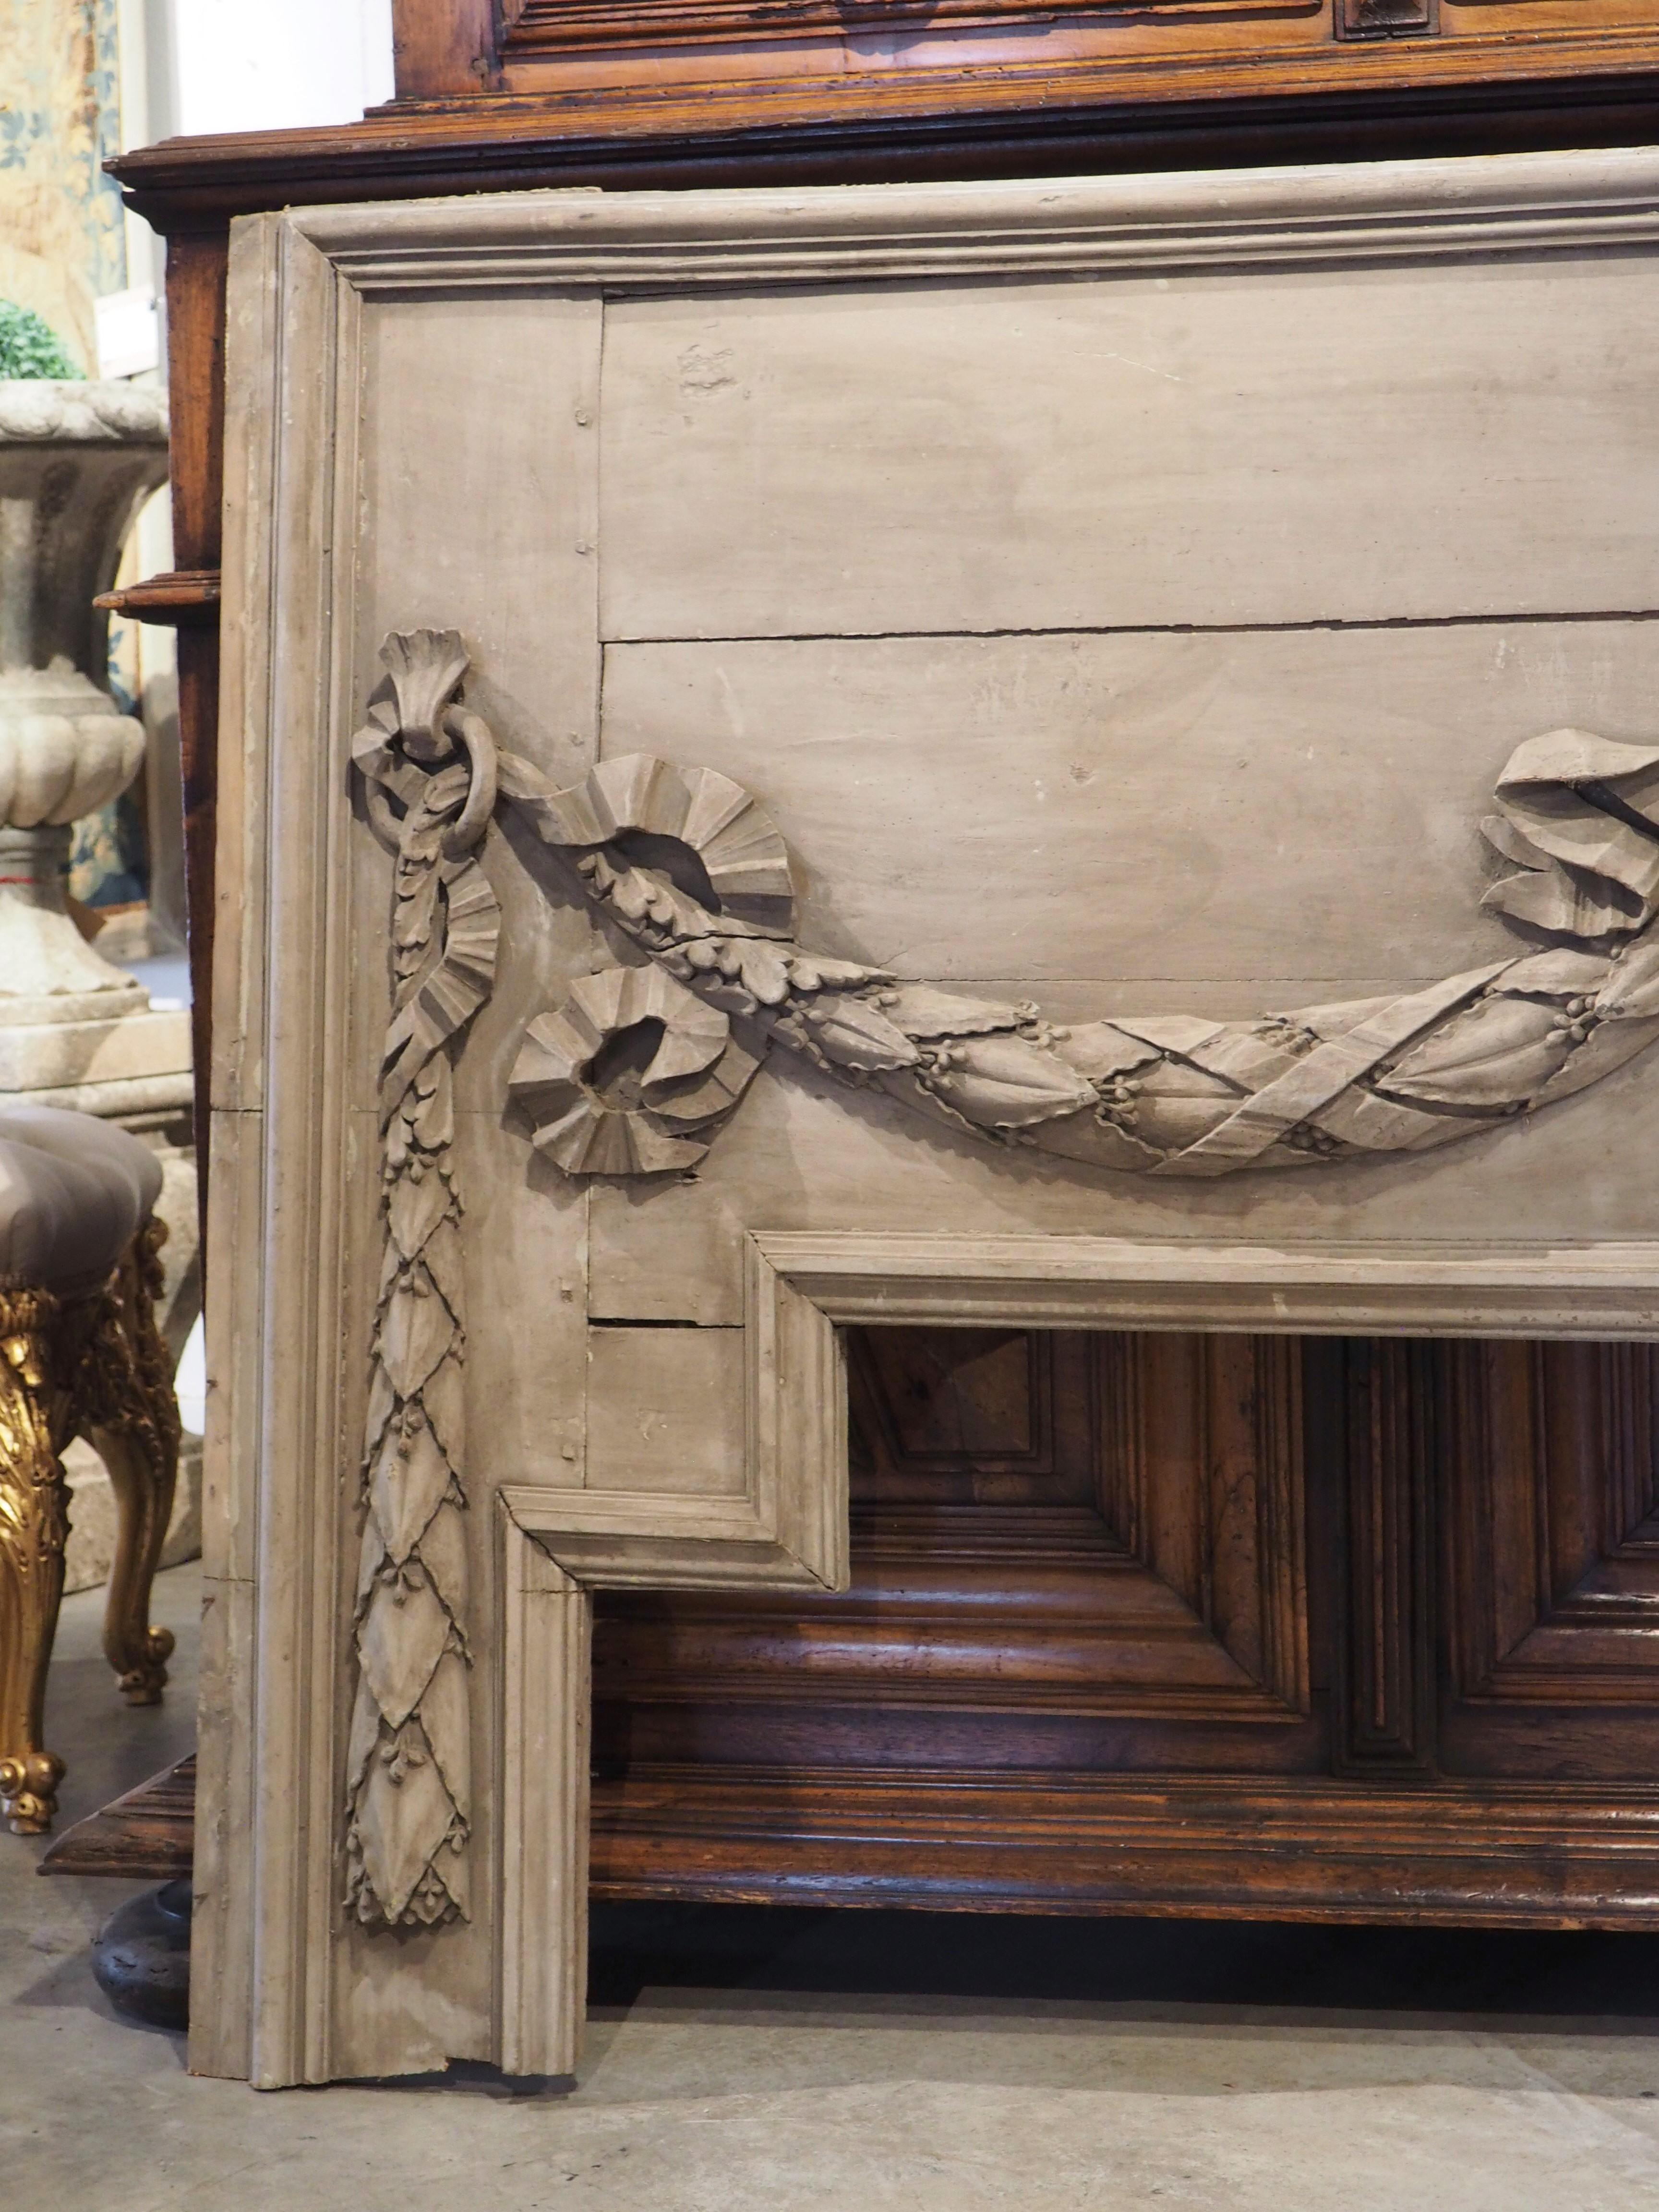 Originally an overdoor from a boiserie room at a French chateau, this large architectural was hand-carved during the Louis XVI period, circa 1790. The overdoor is roughly rectangular, with the exception of the stepped bottom molding, which would